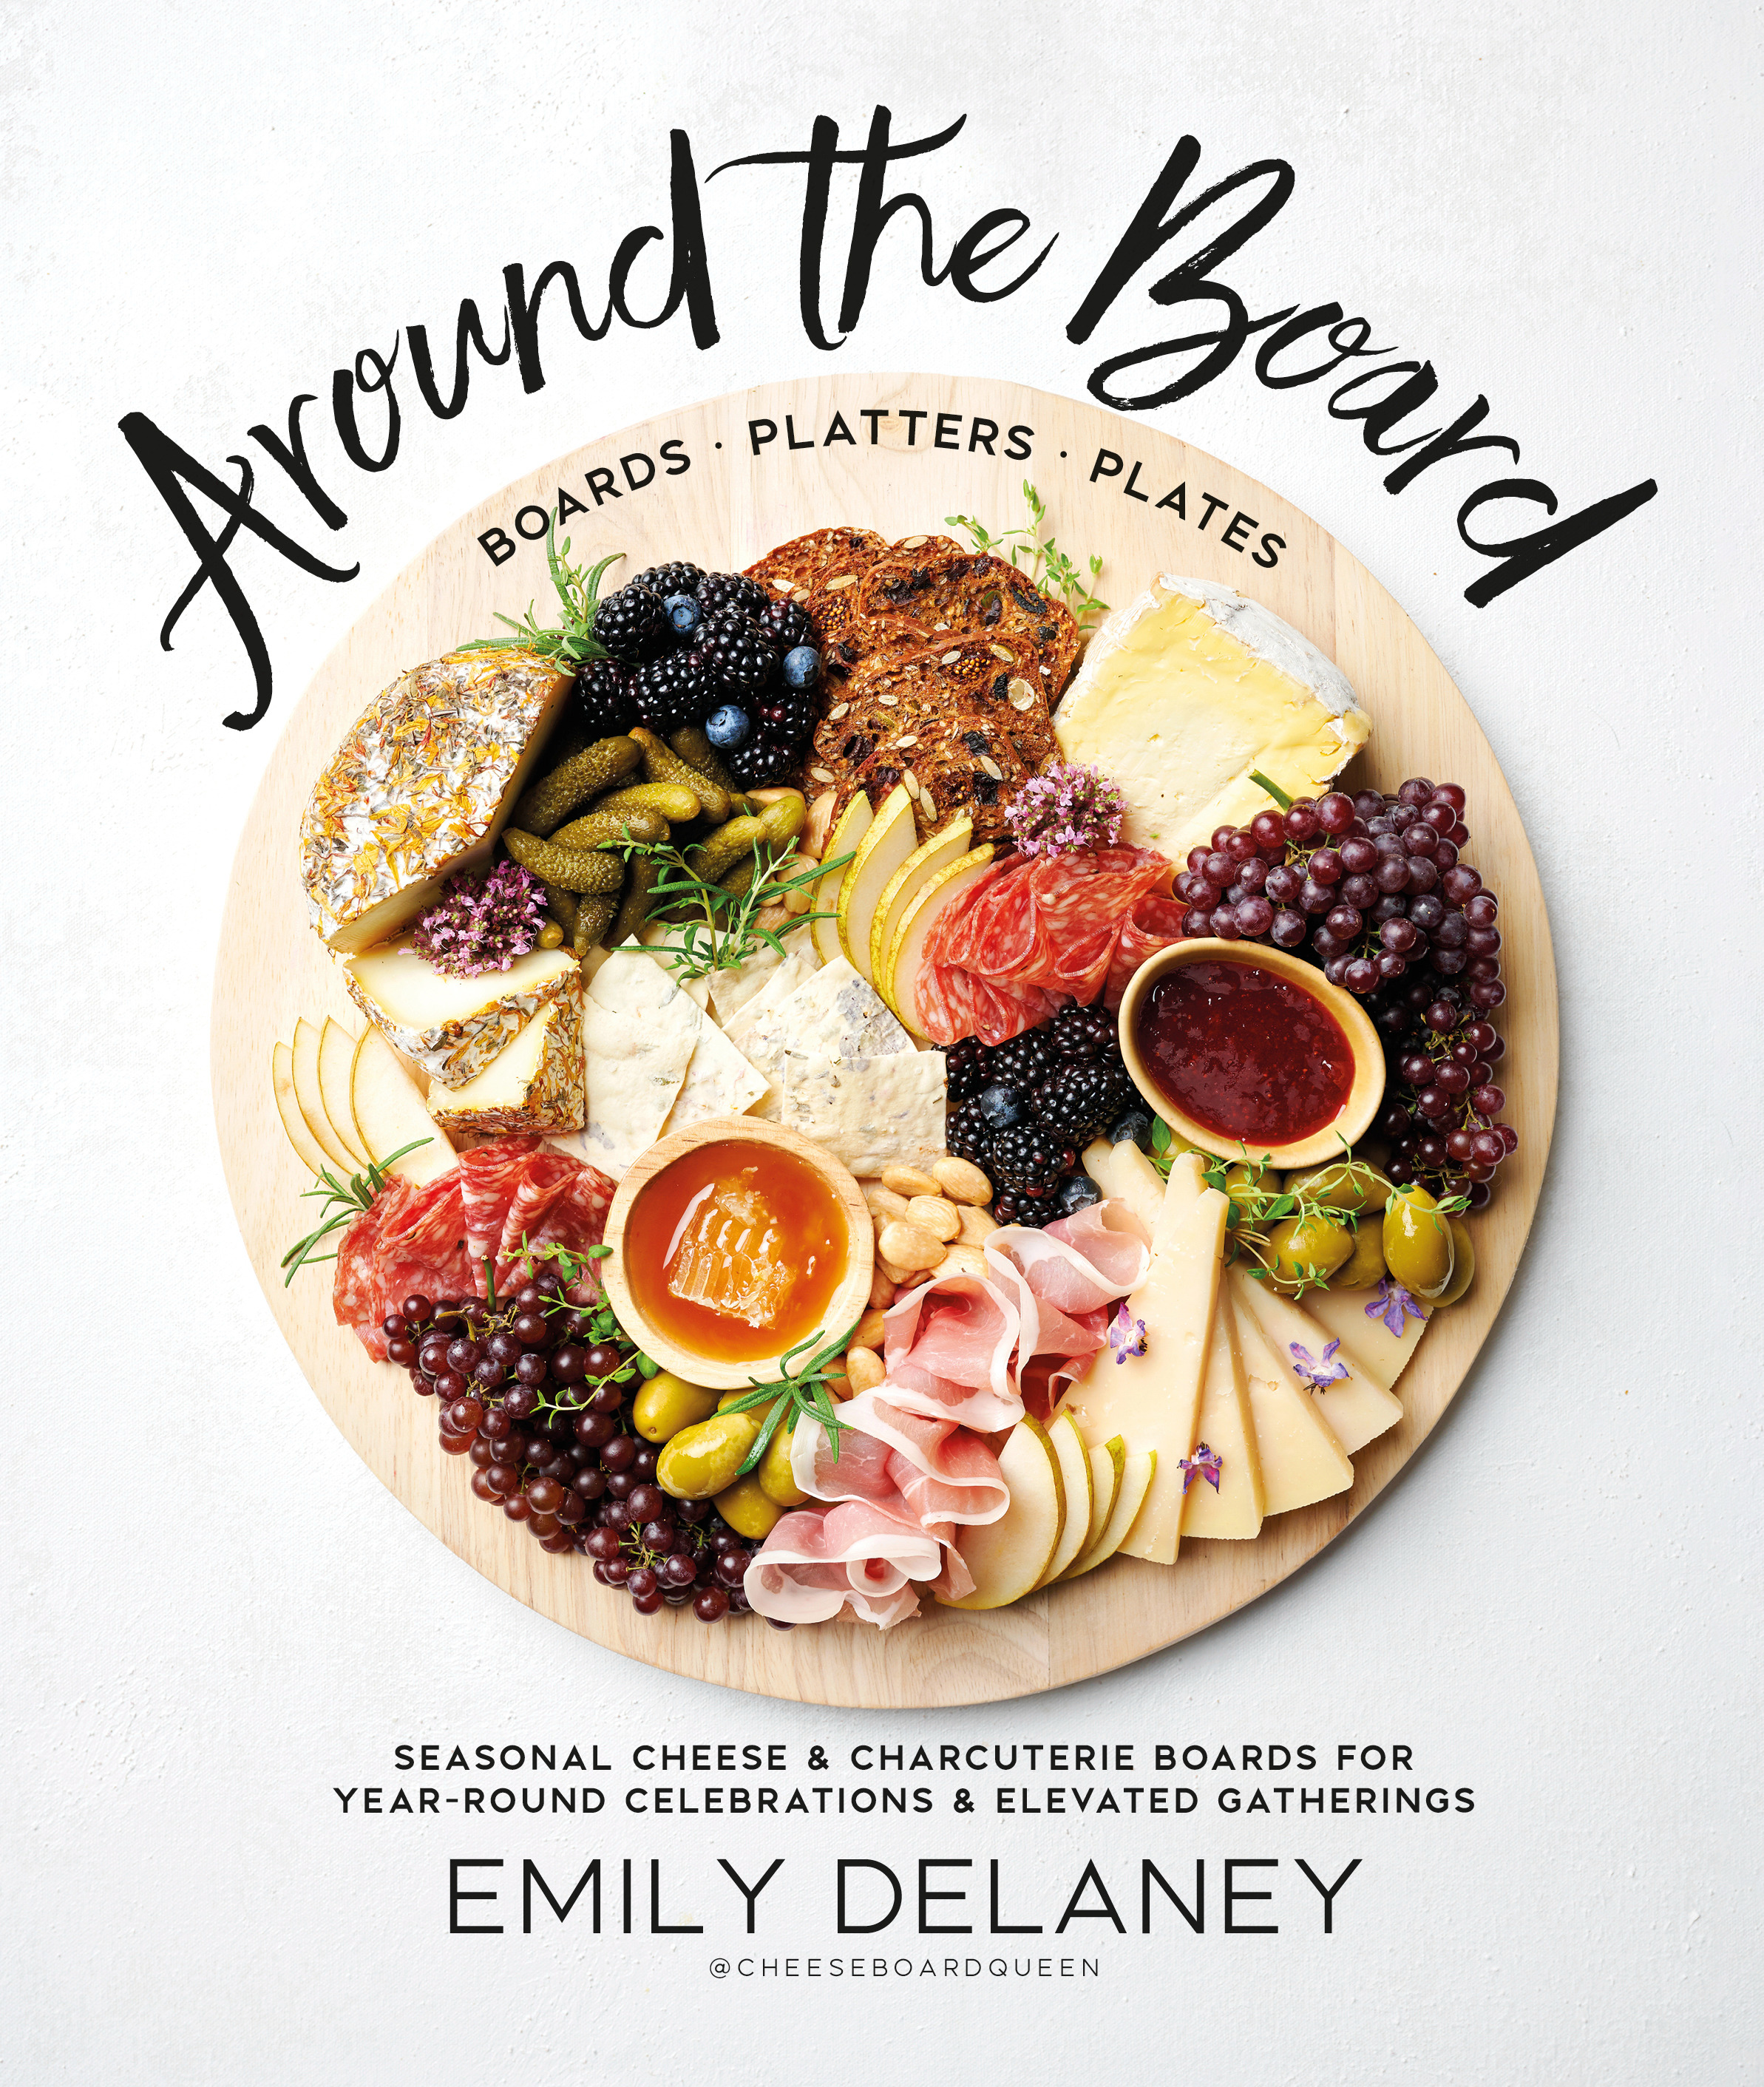 Around the Board : Boards, Platters, and Plates: Seasonal Cheese and Charcuterie for Year-Round Celebrations and Elevated Gatherings | Cookbook